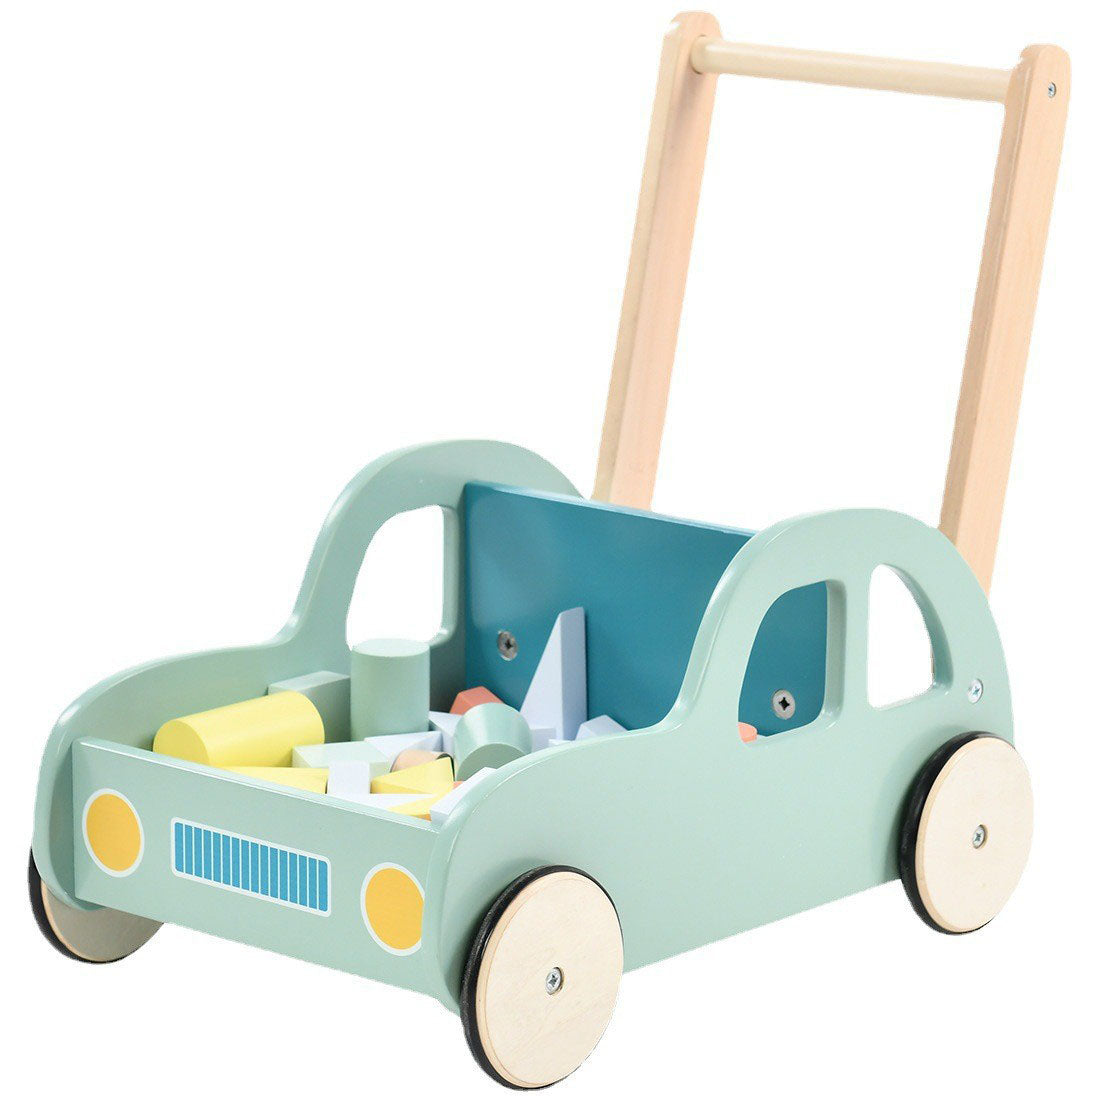 Wooden Baby Walker with Wooden Stacking Blocks - Car